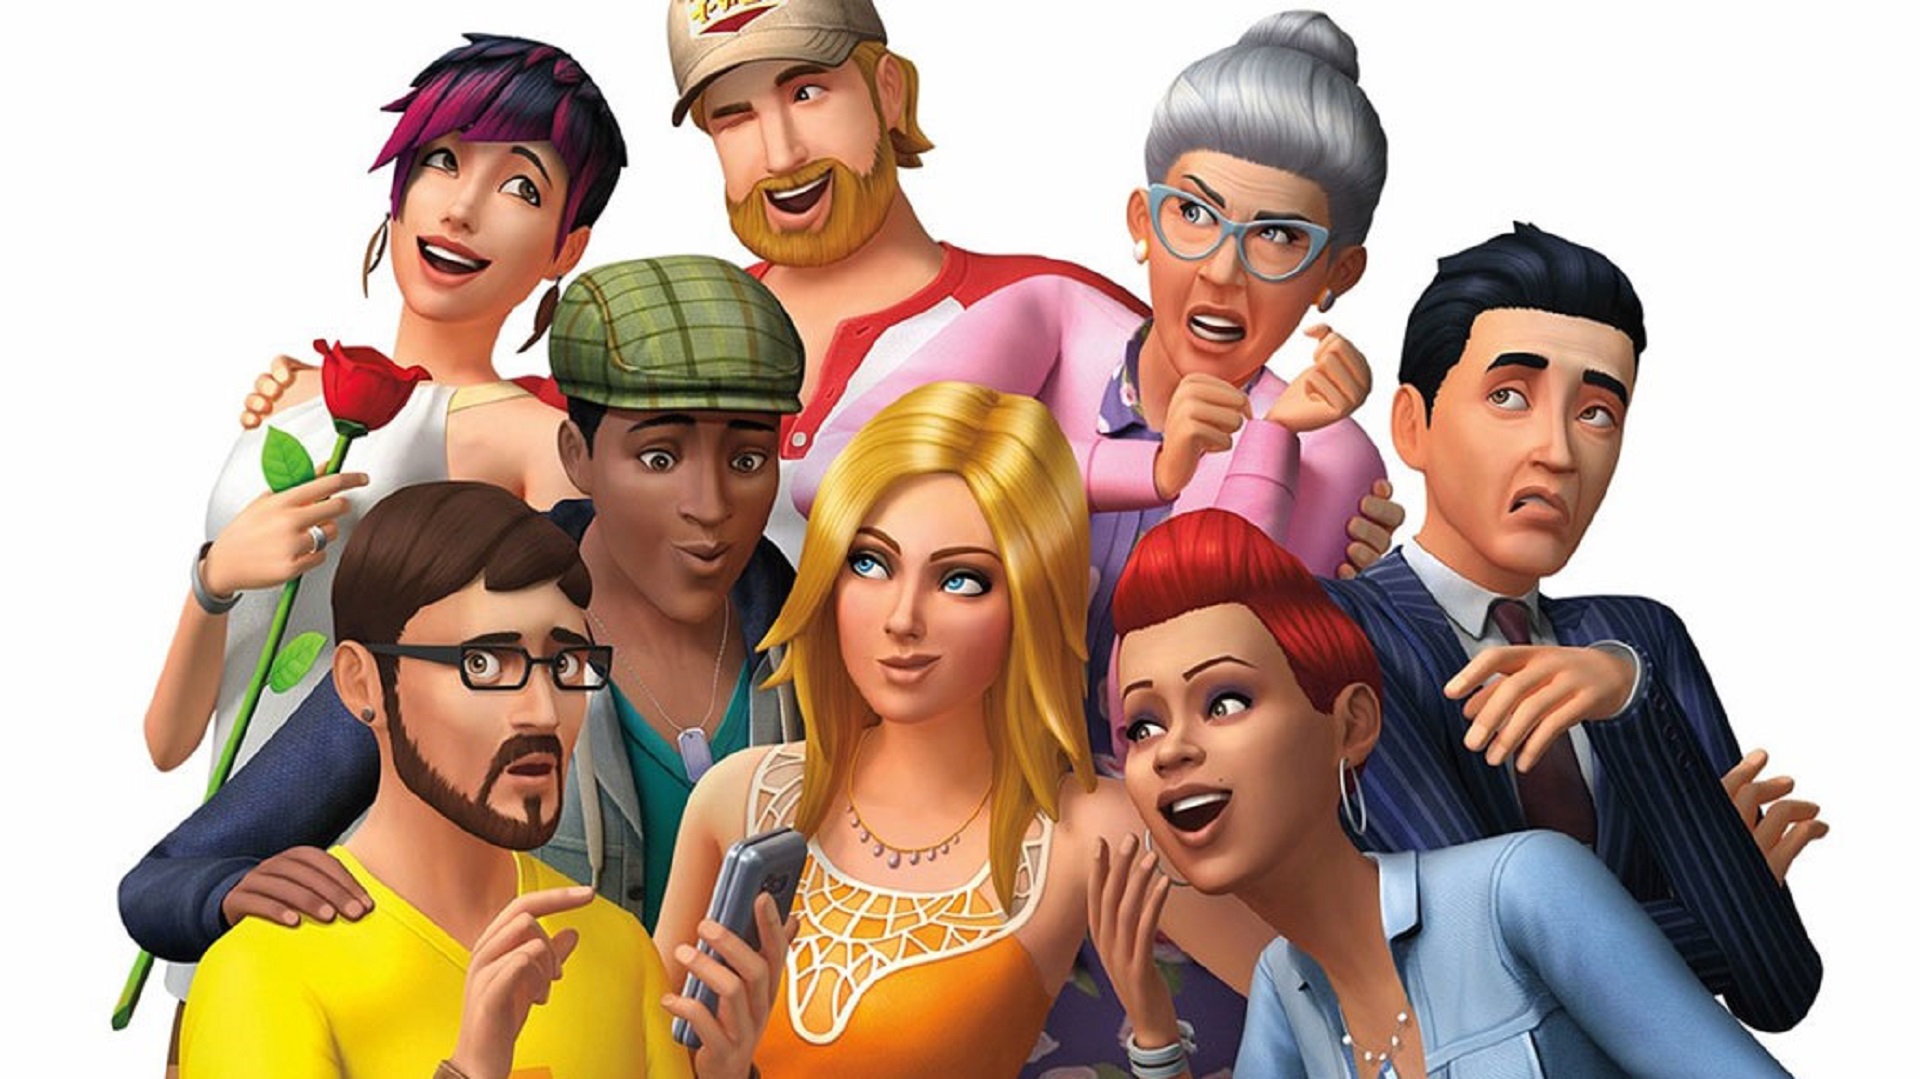 will sims 4 be on steam